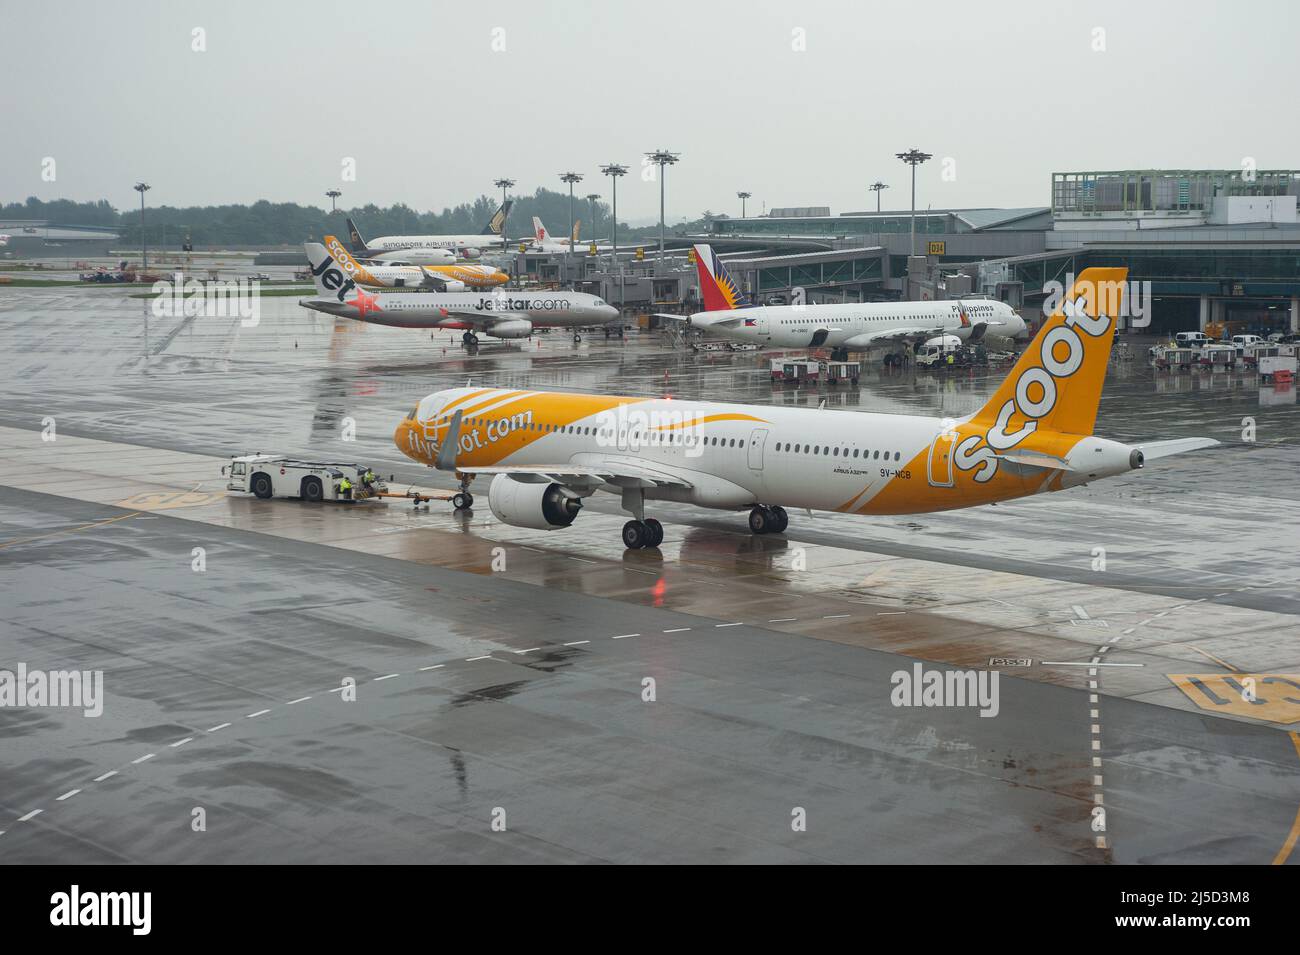 Nov. 15, 2021, Singapore, Republic of Singapore, Asia - A Scoot Airlines Airbus A321neo passenger aircraft with registration 9V-NCB during pushback at Changi International Airport with parked aircraft in the background. Scoot is a low-cost airline based in Singapore and a subsidiary of Singapore Airlines. [automated translation] Stock Photo